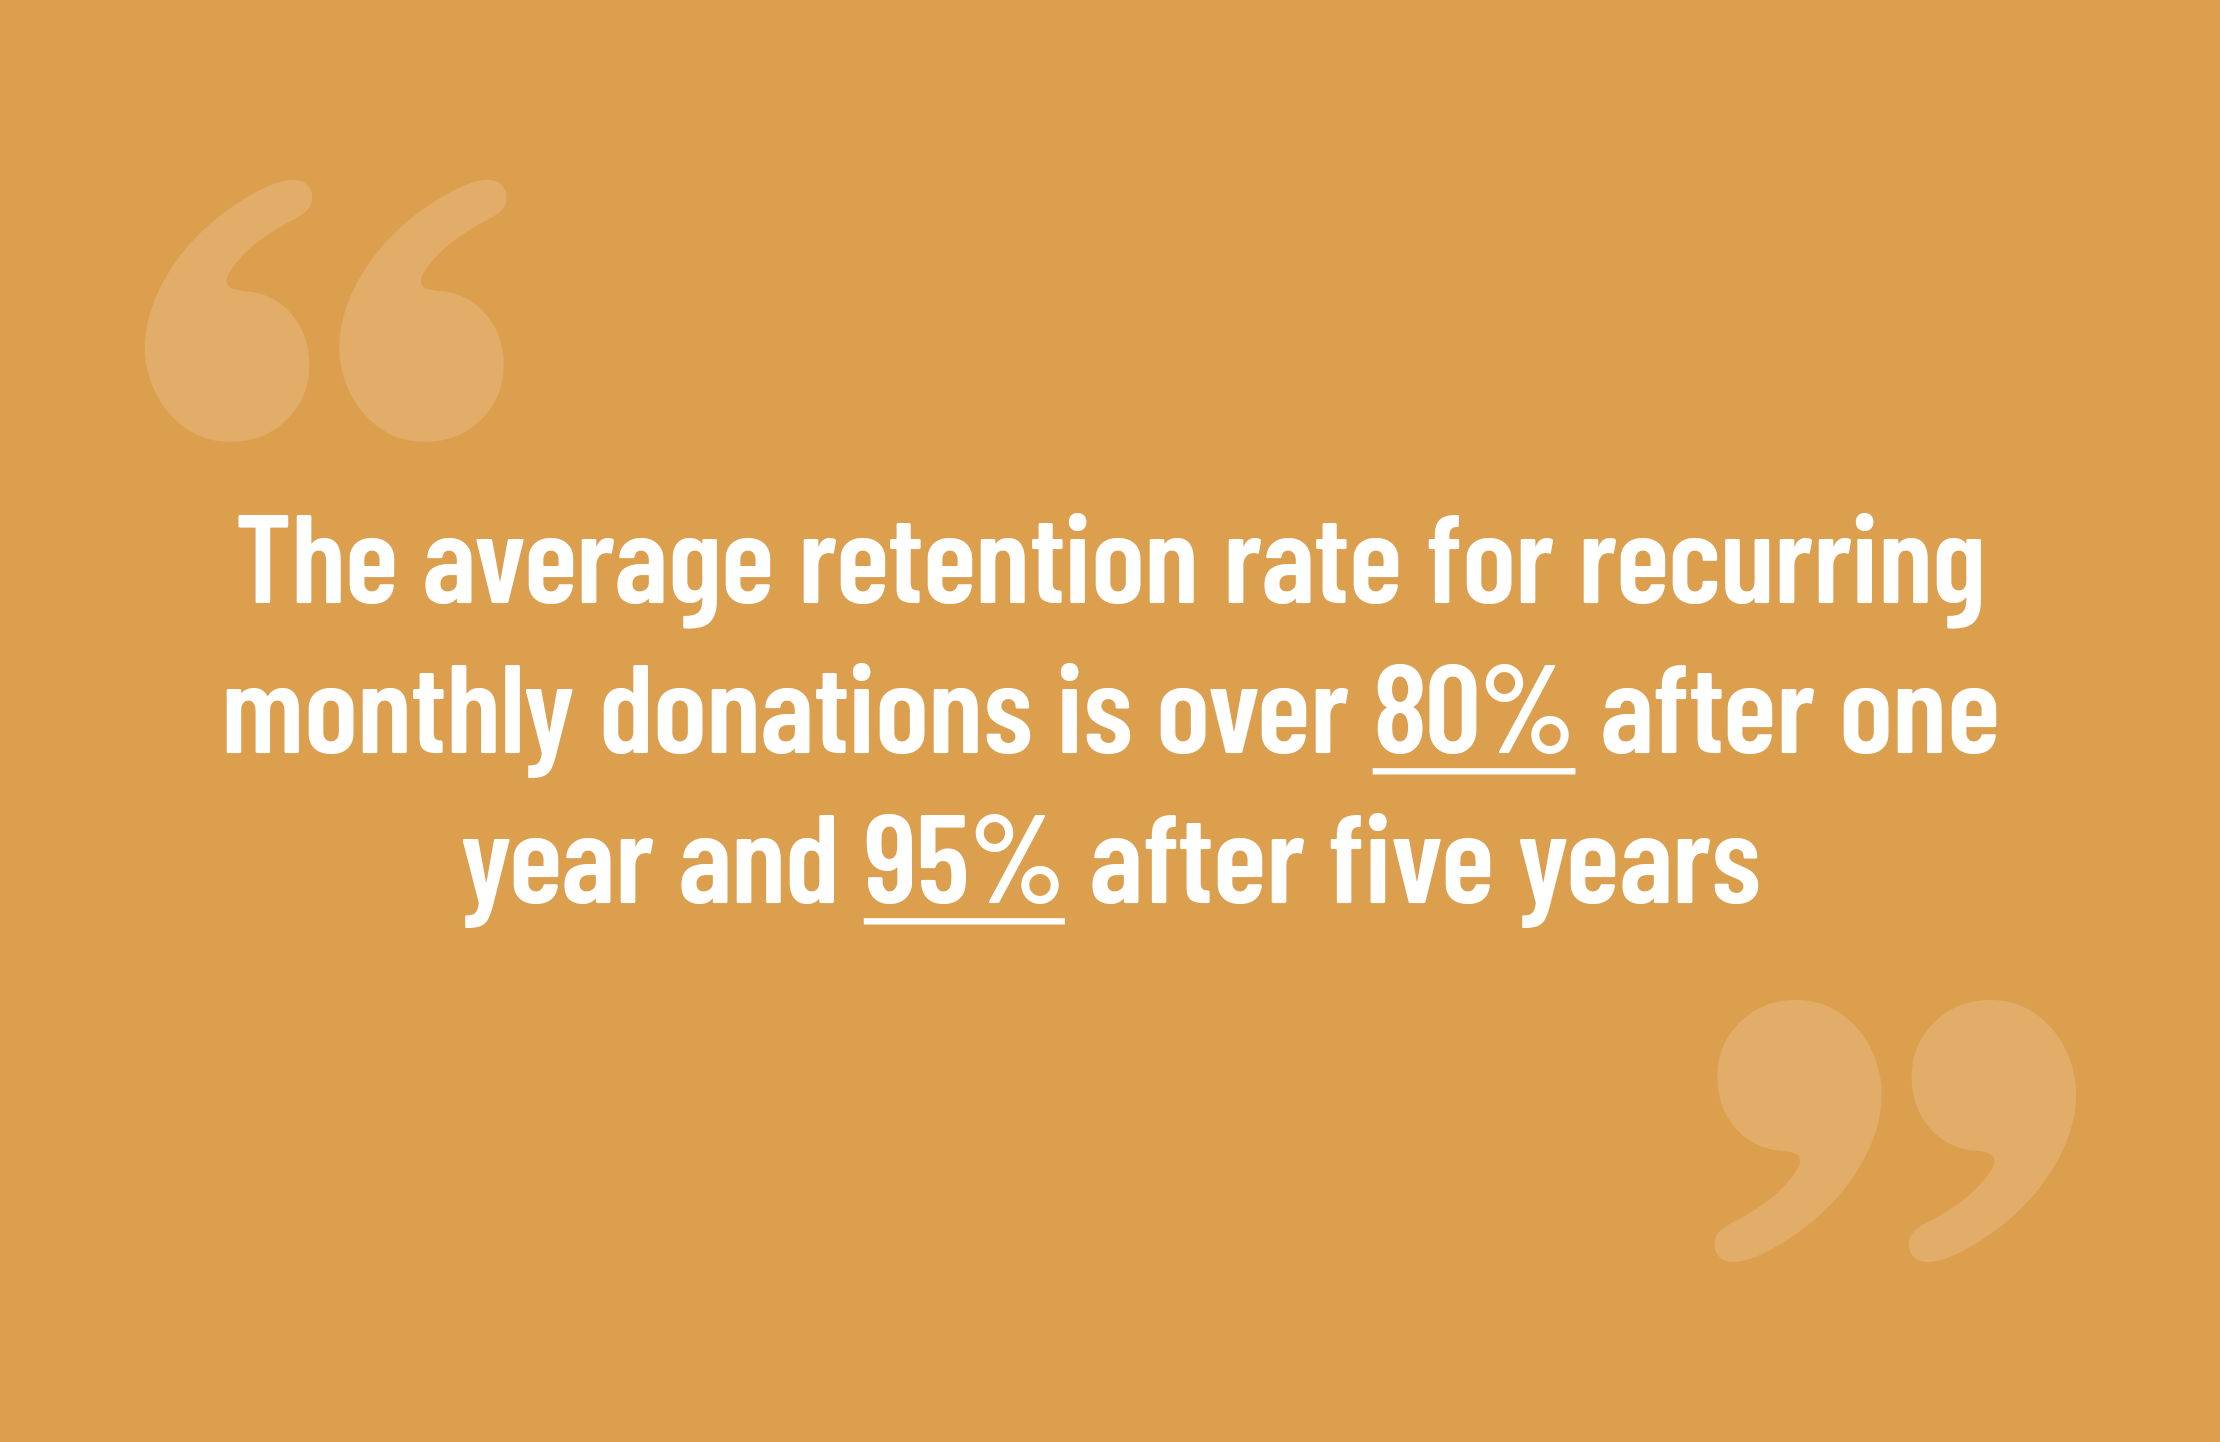 The average retention rate for recurring monthly donations is over 80% after one year and 95% after five years